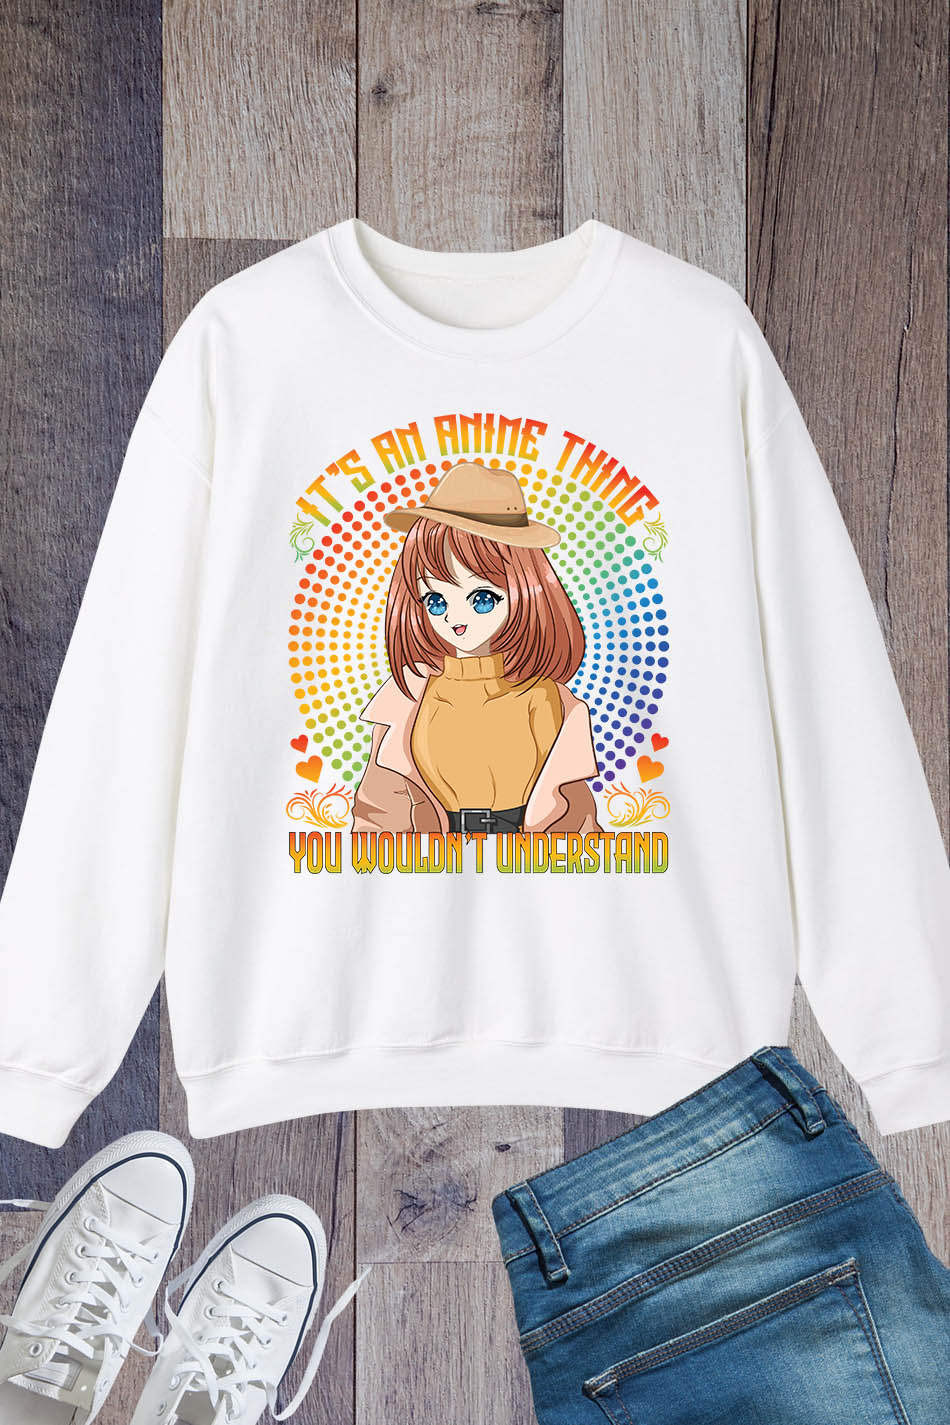 It's an Anime Thing You Wouldn't Understand Funny Sweatshirt